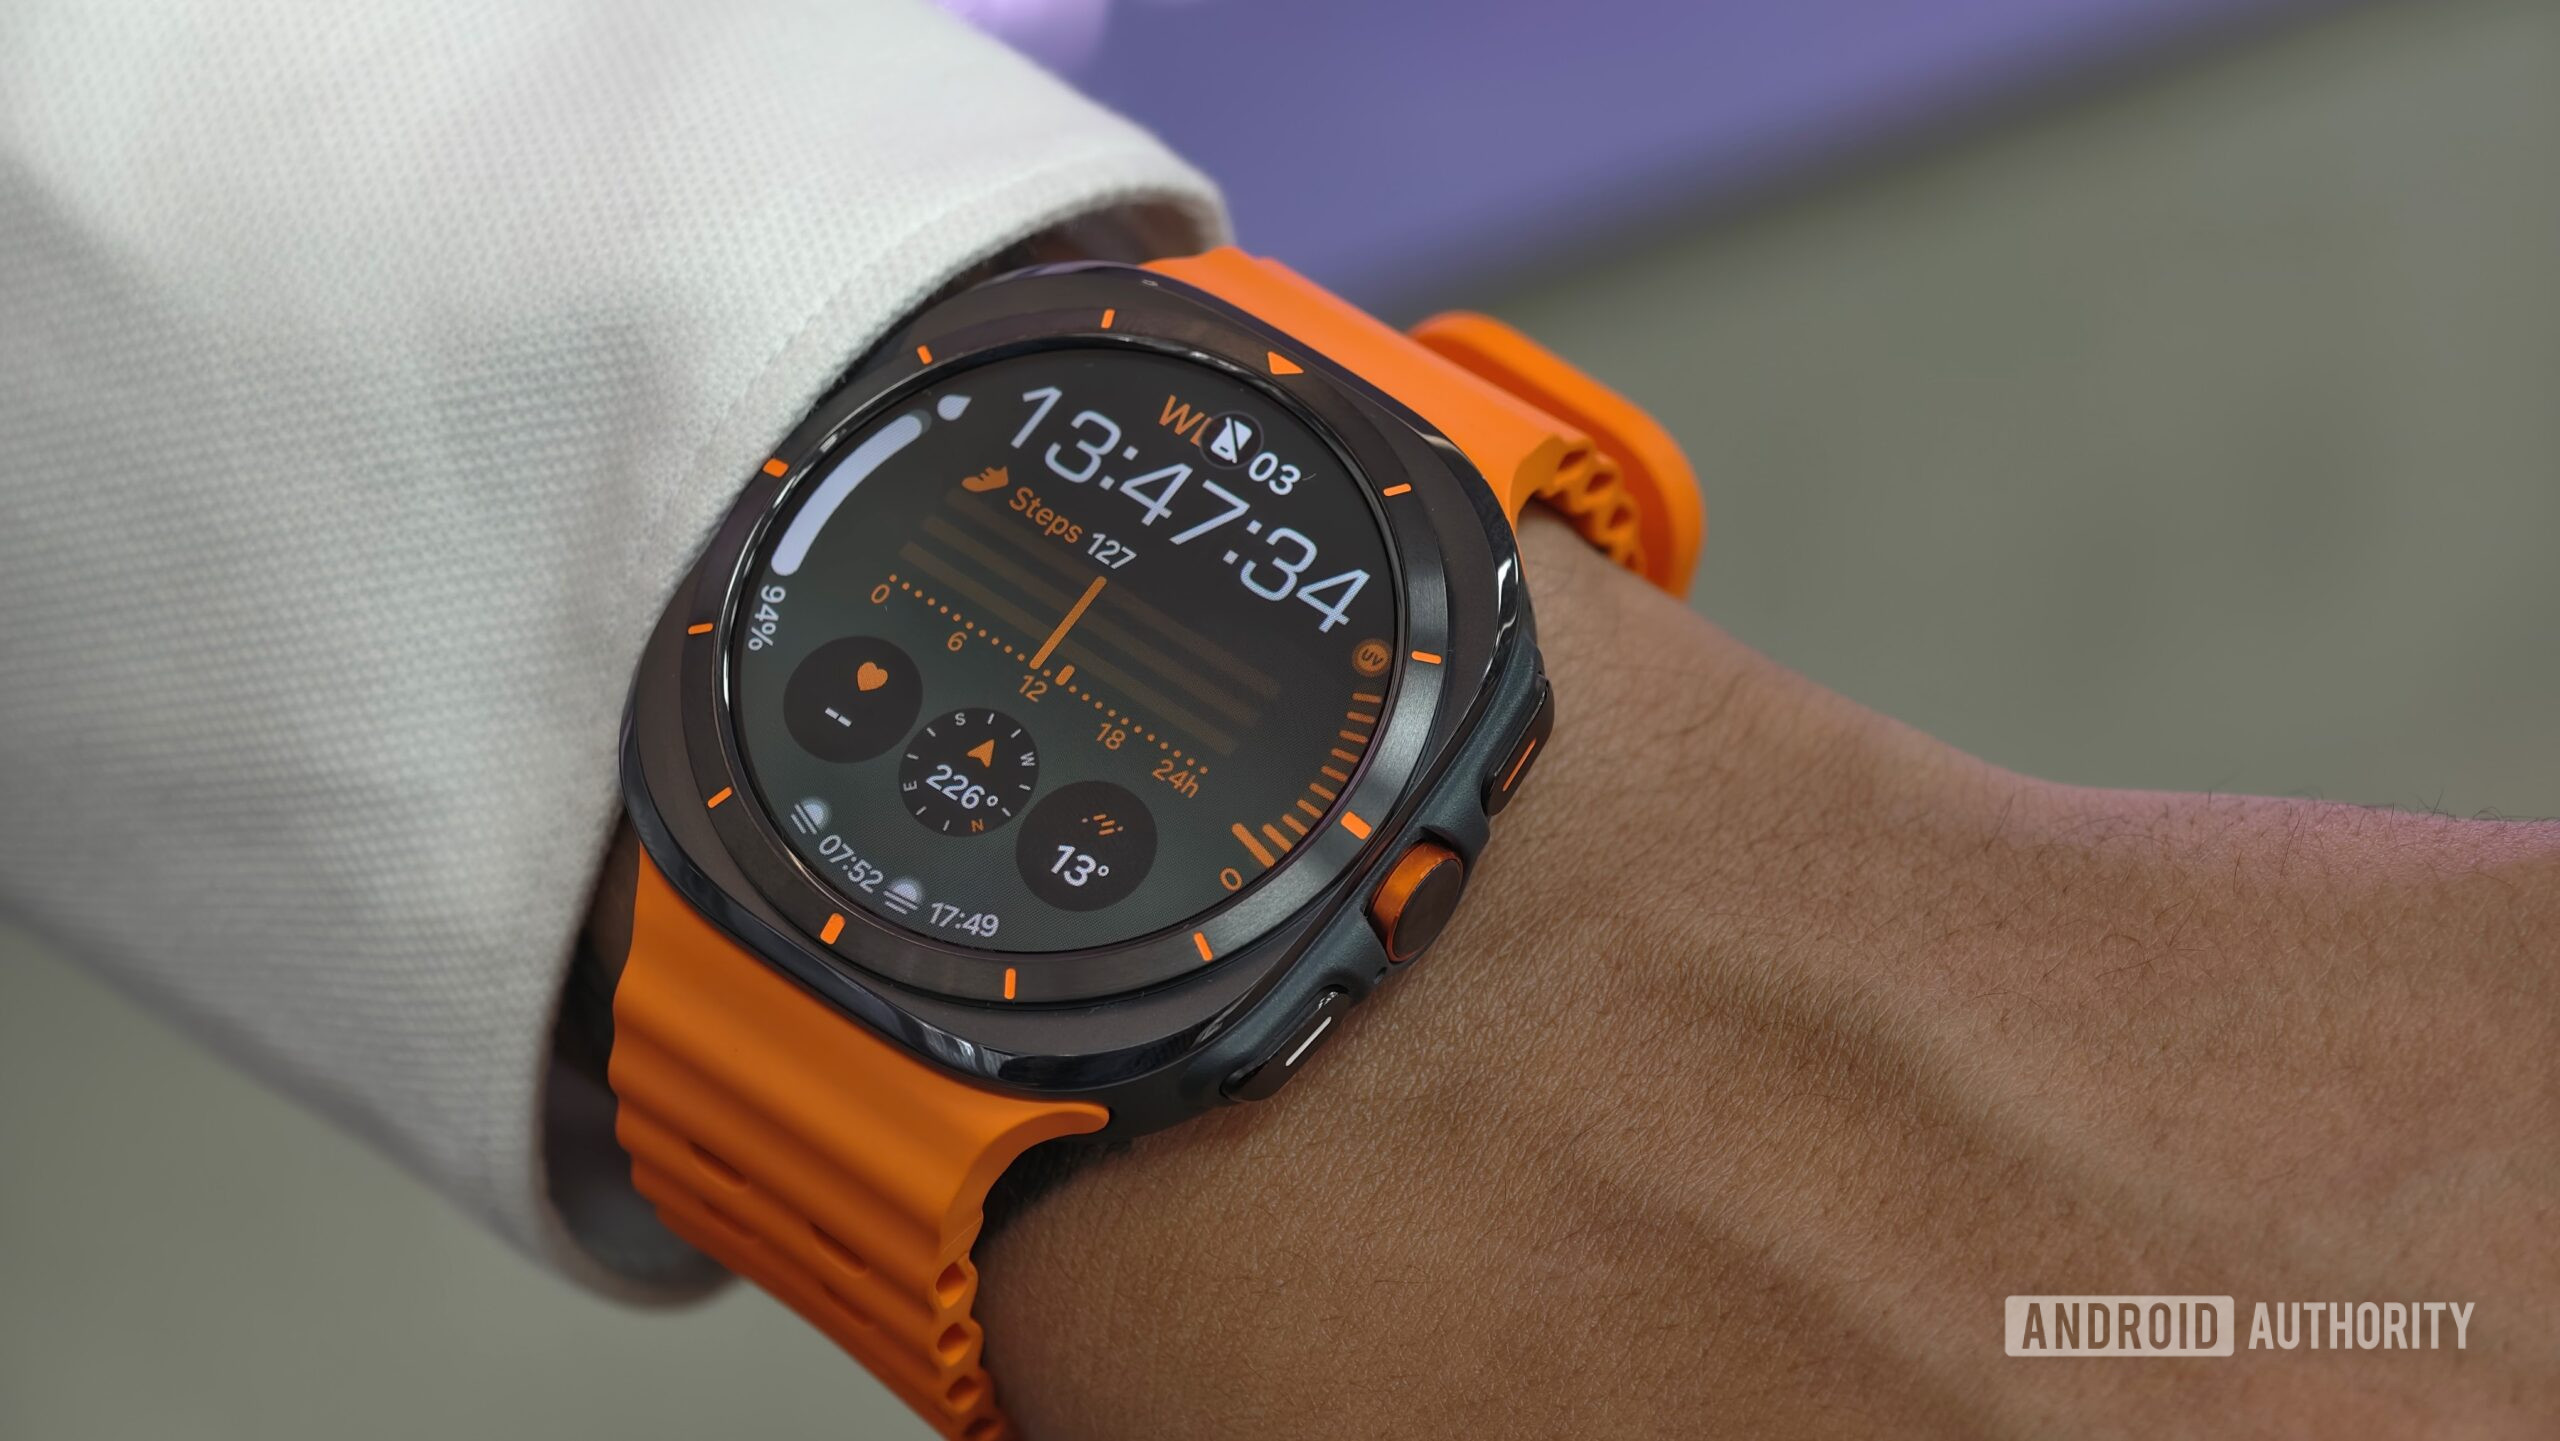 The Samsung Galaxy Watch Ultra worn on a wrist, showing the side buttons.